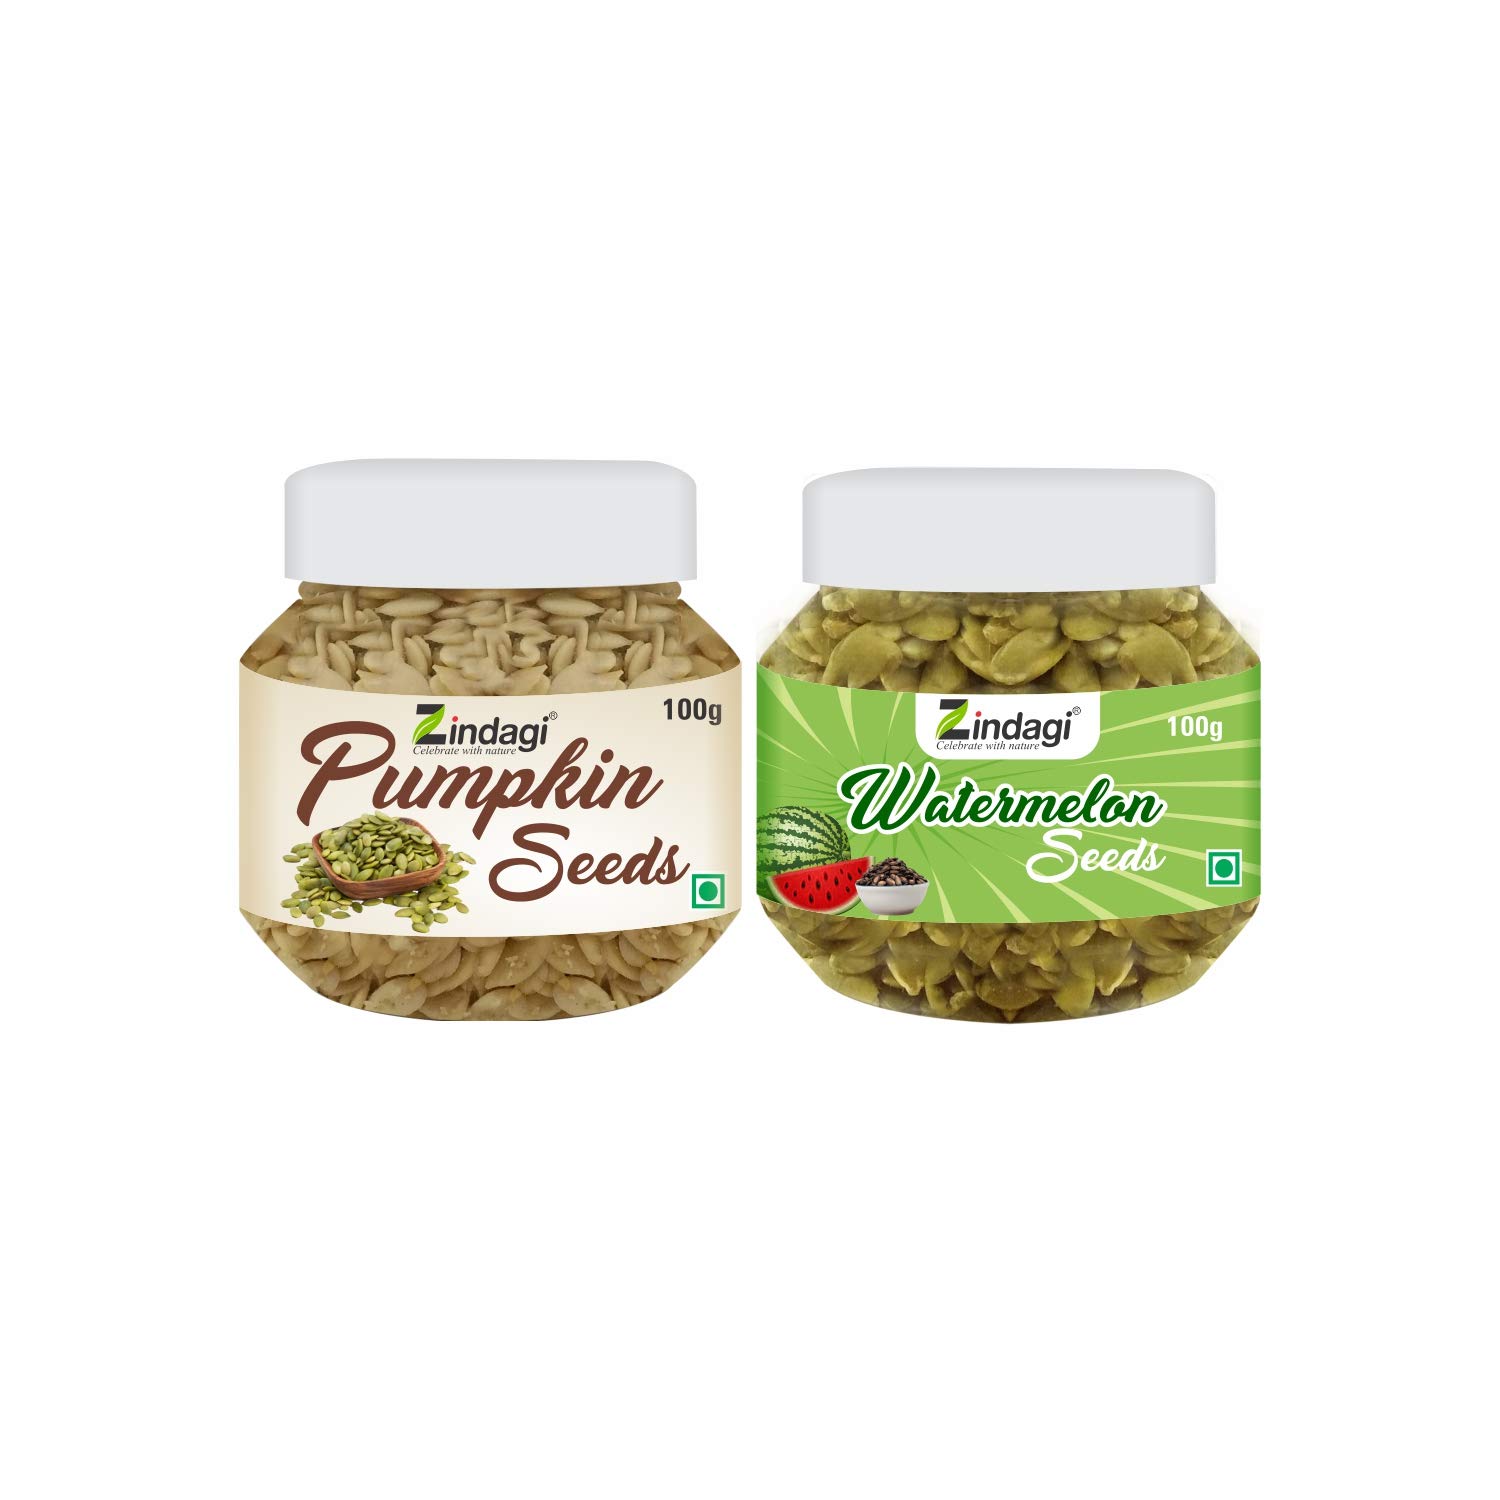 Buy Zindagi Pumpkin Seeds With Watermelon Seeds - Low Calorie Seeds 200gm (Combo Offer) at Best Price Online